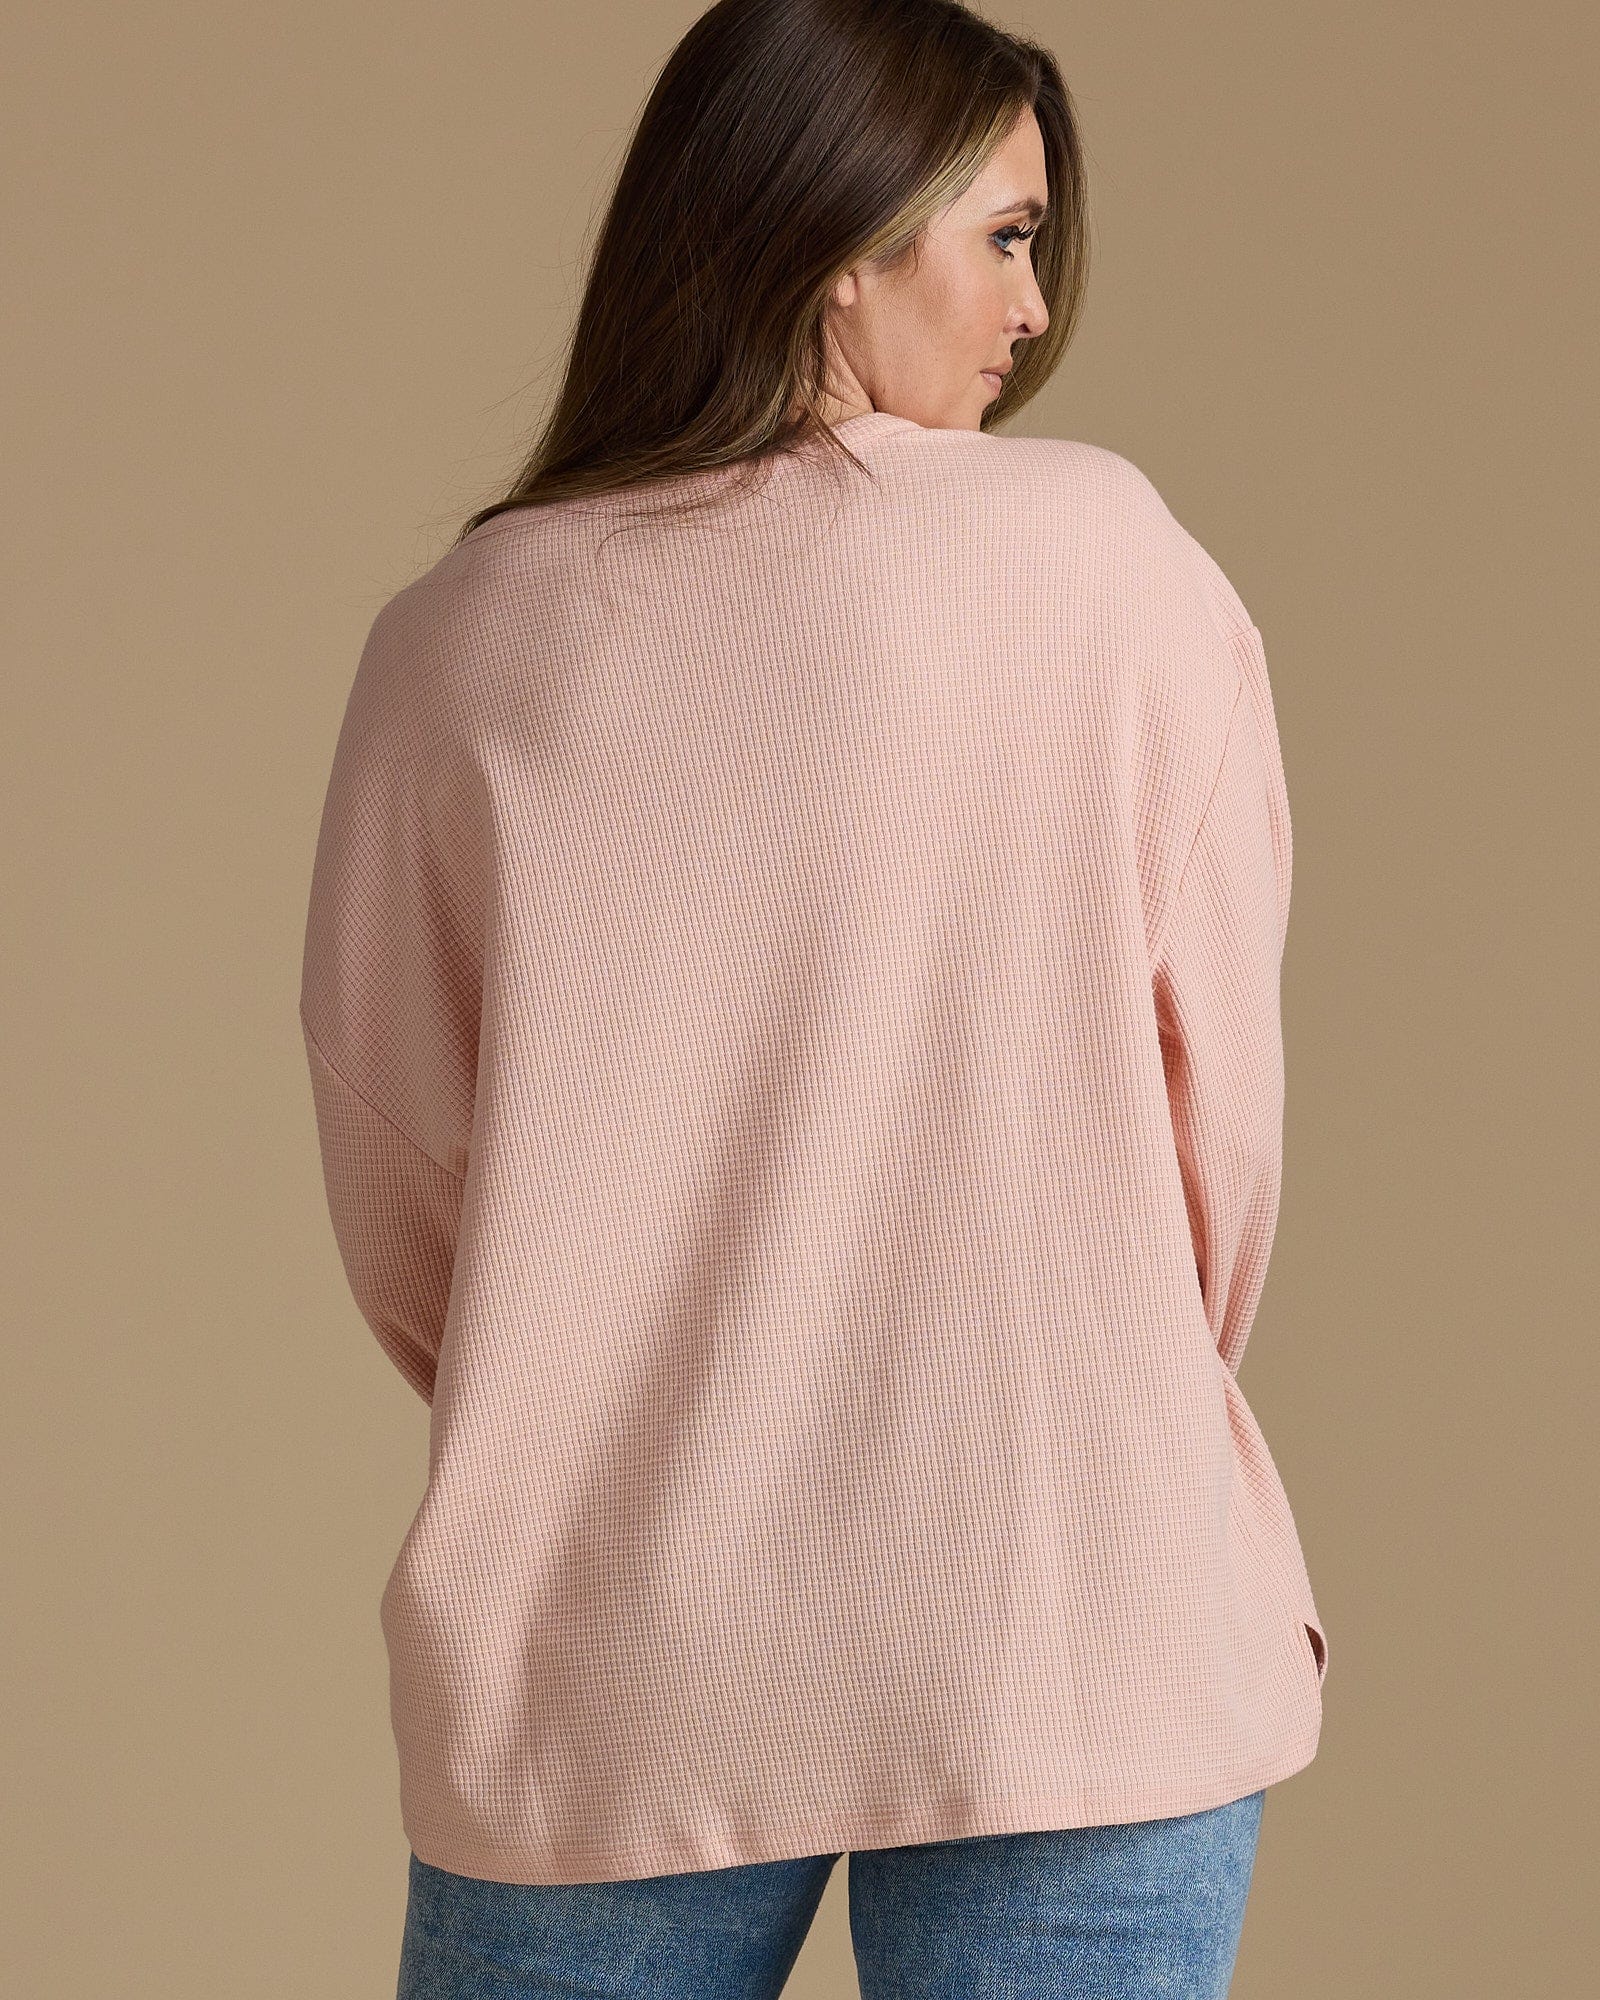 Woman in a pink, ribbed long sleeve shirt